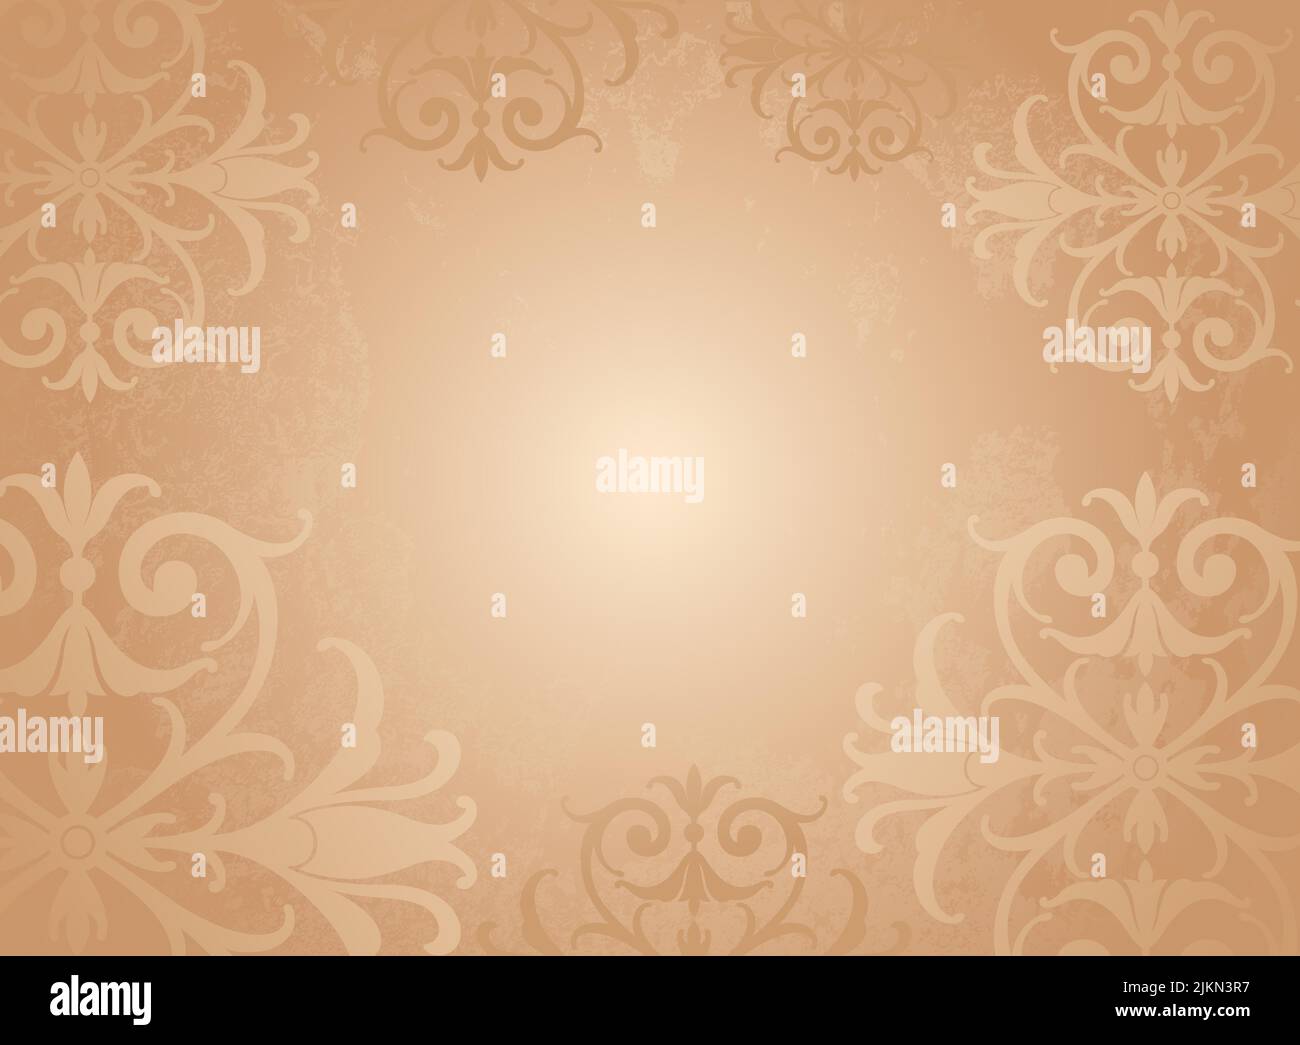 A fancy floral vector decorative background. Stock Vector